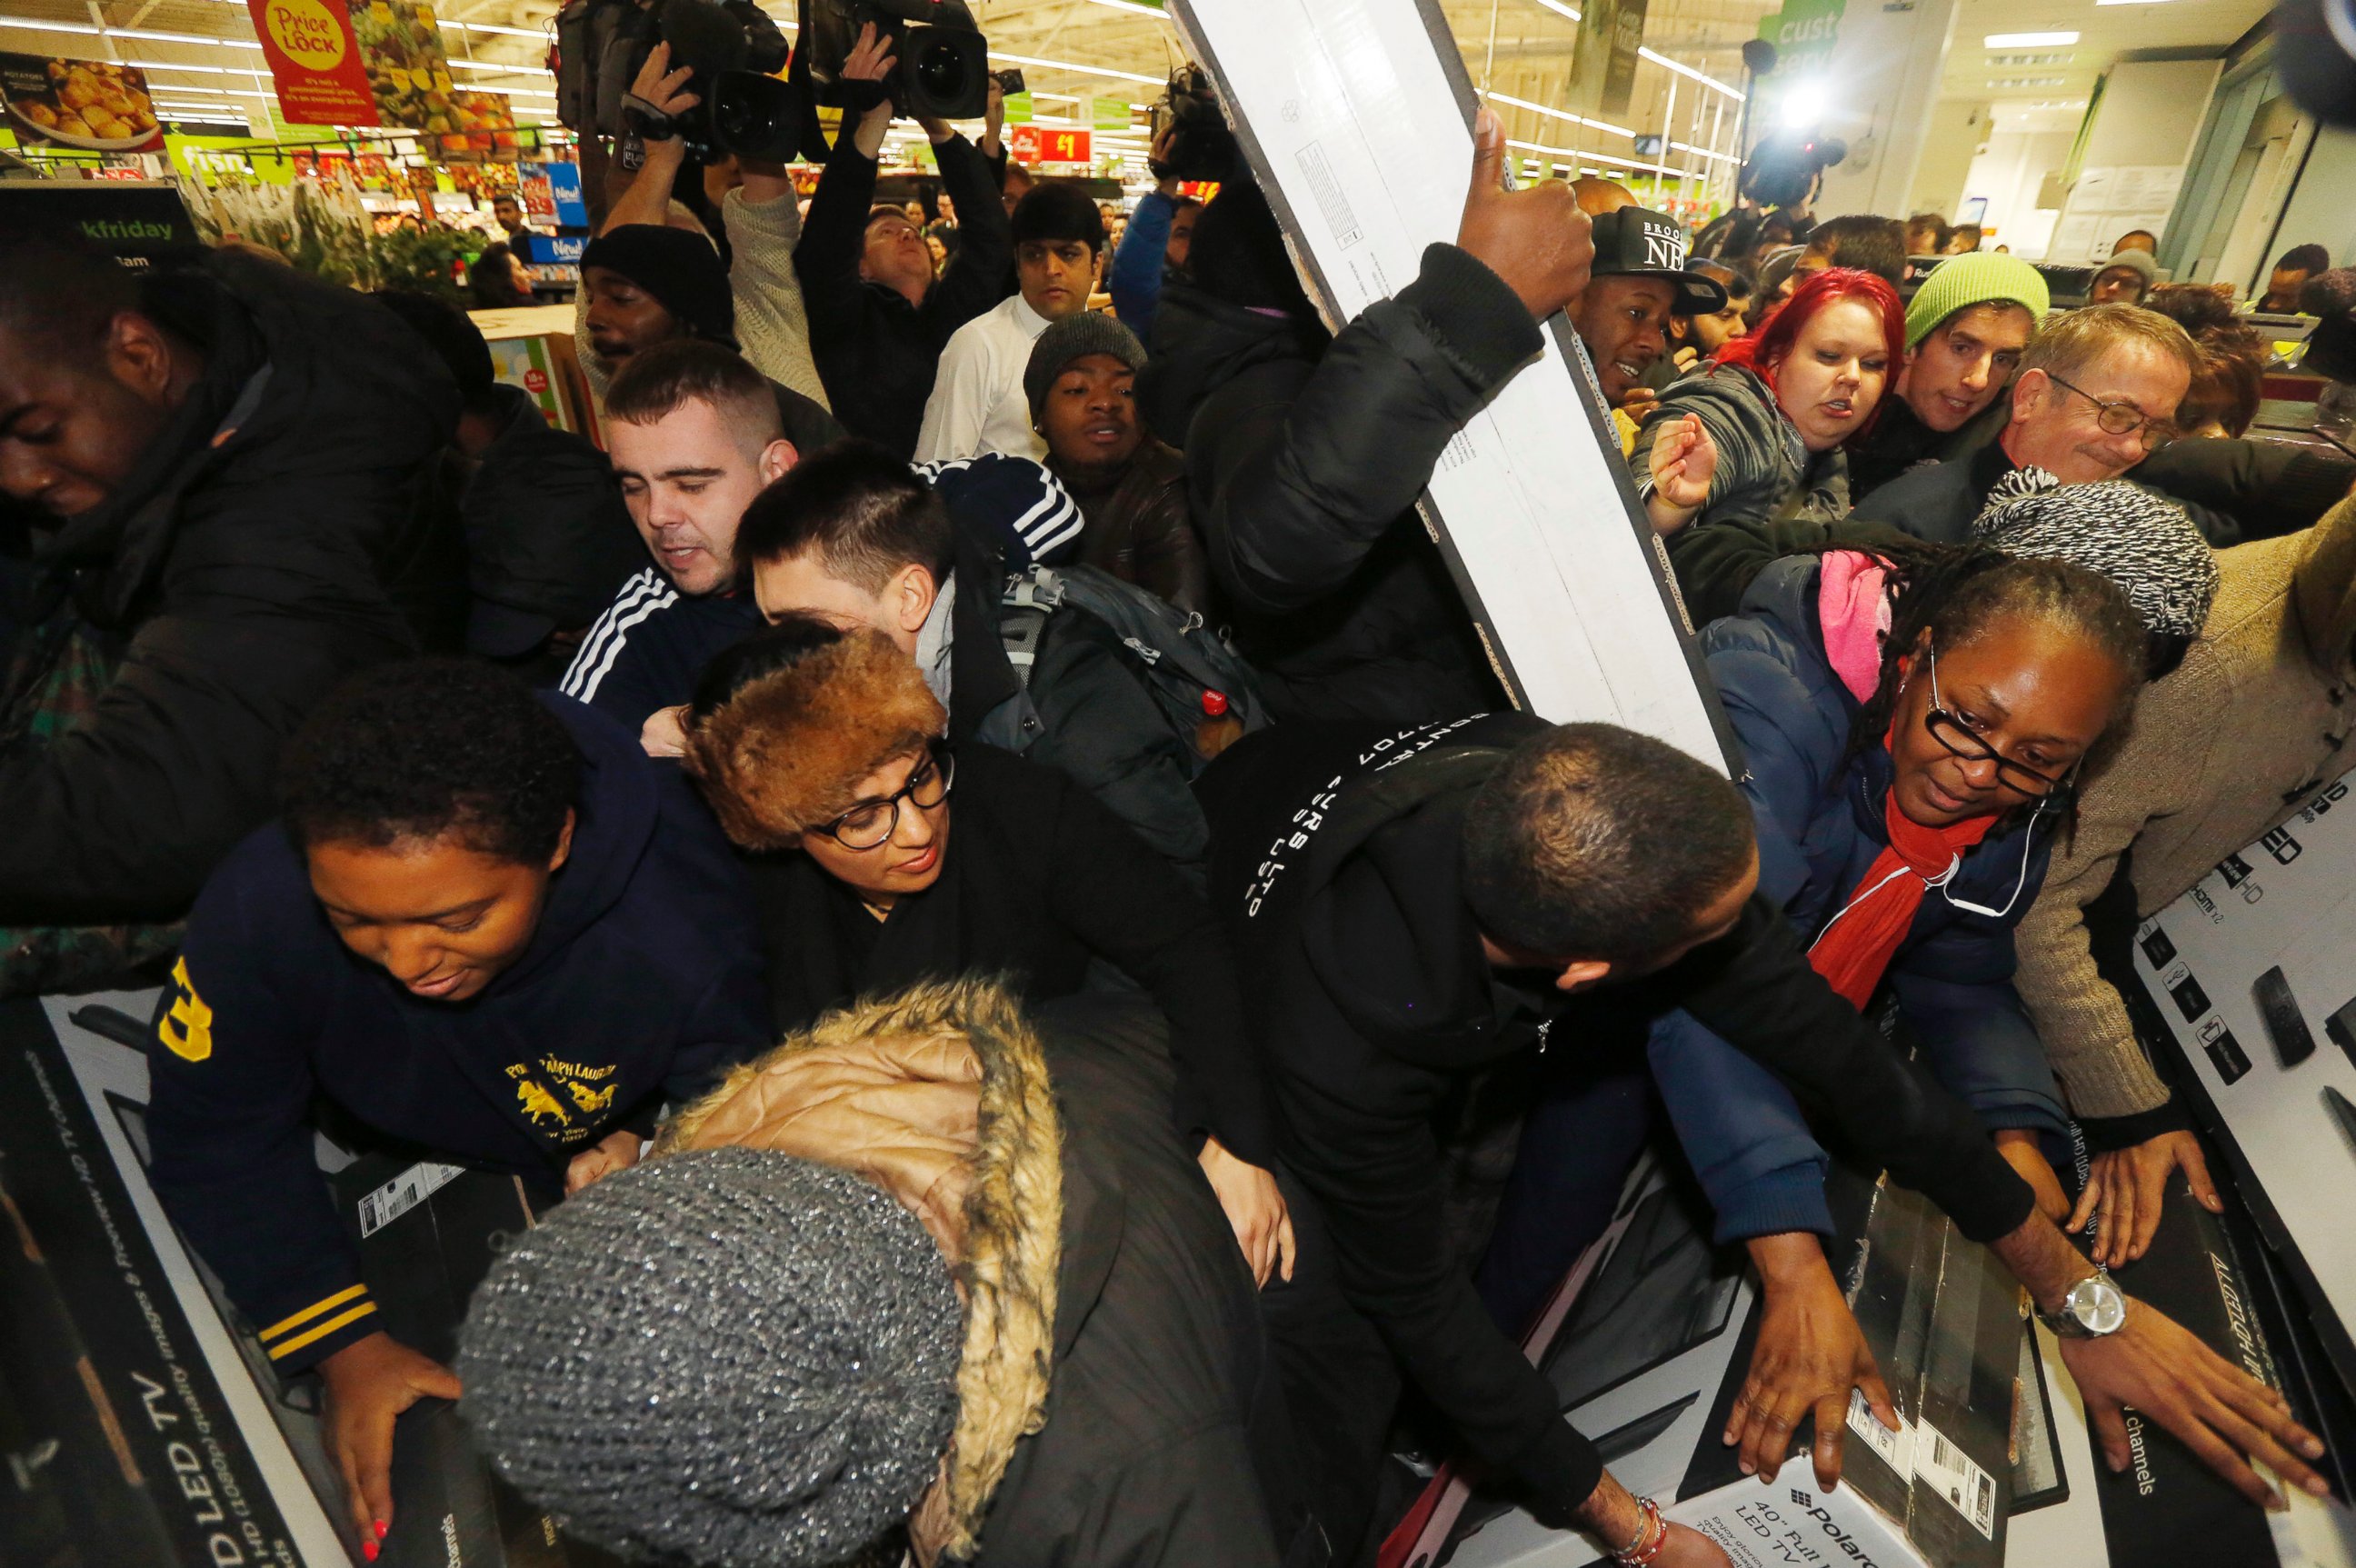 PHOTO: Shoppers compete to purchase retail items on "Black Friday" at an Asda superstore in Wembley, north London November 28, 2014.